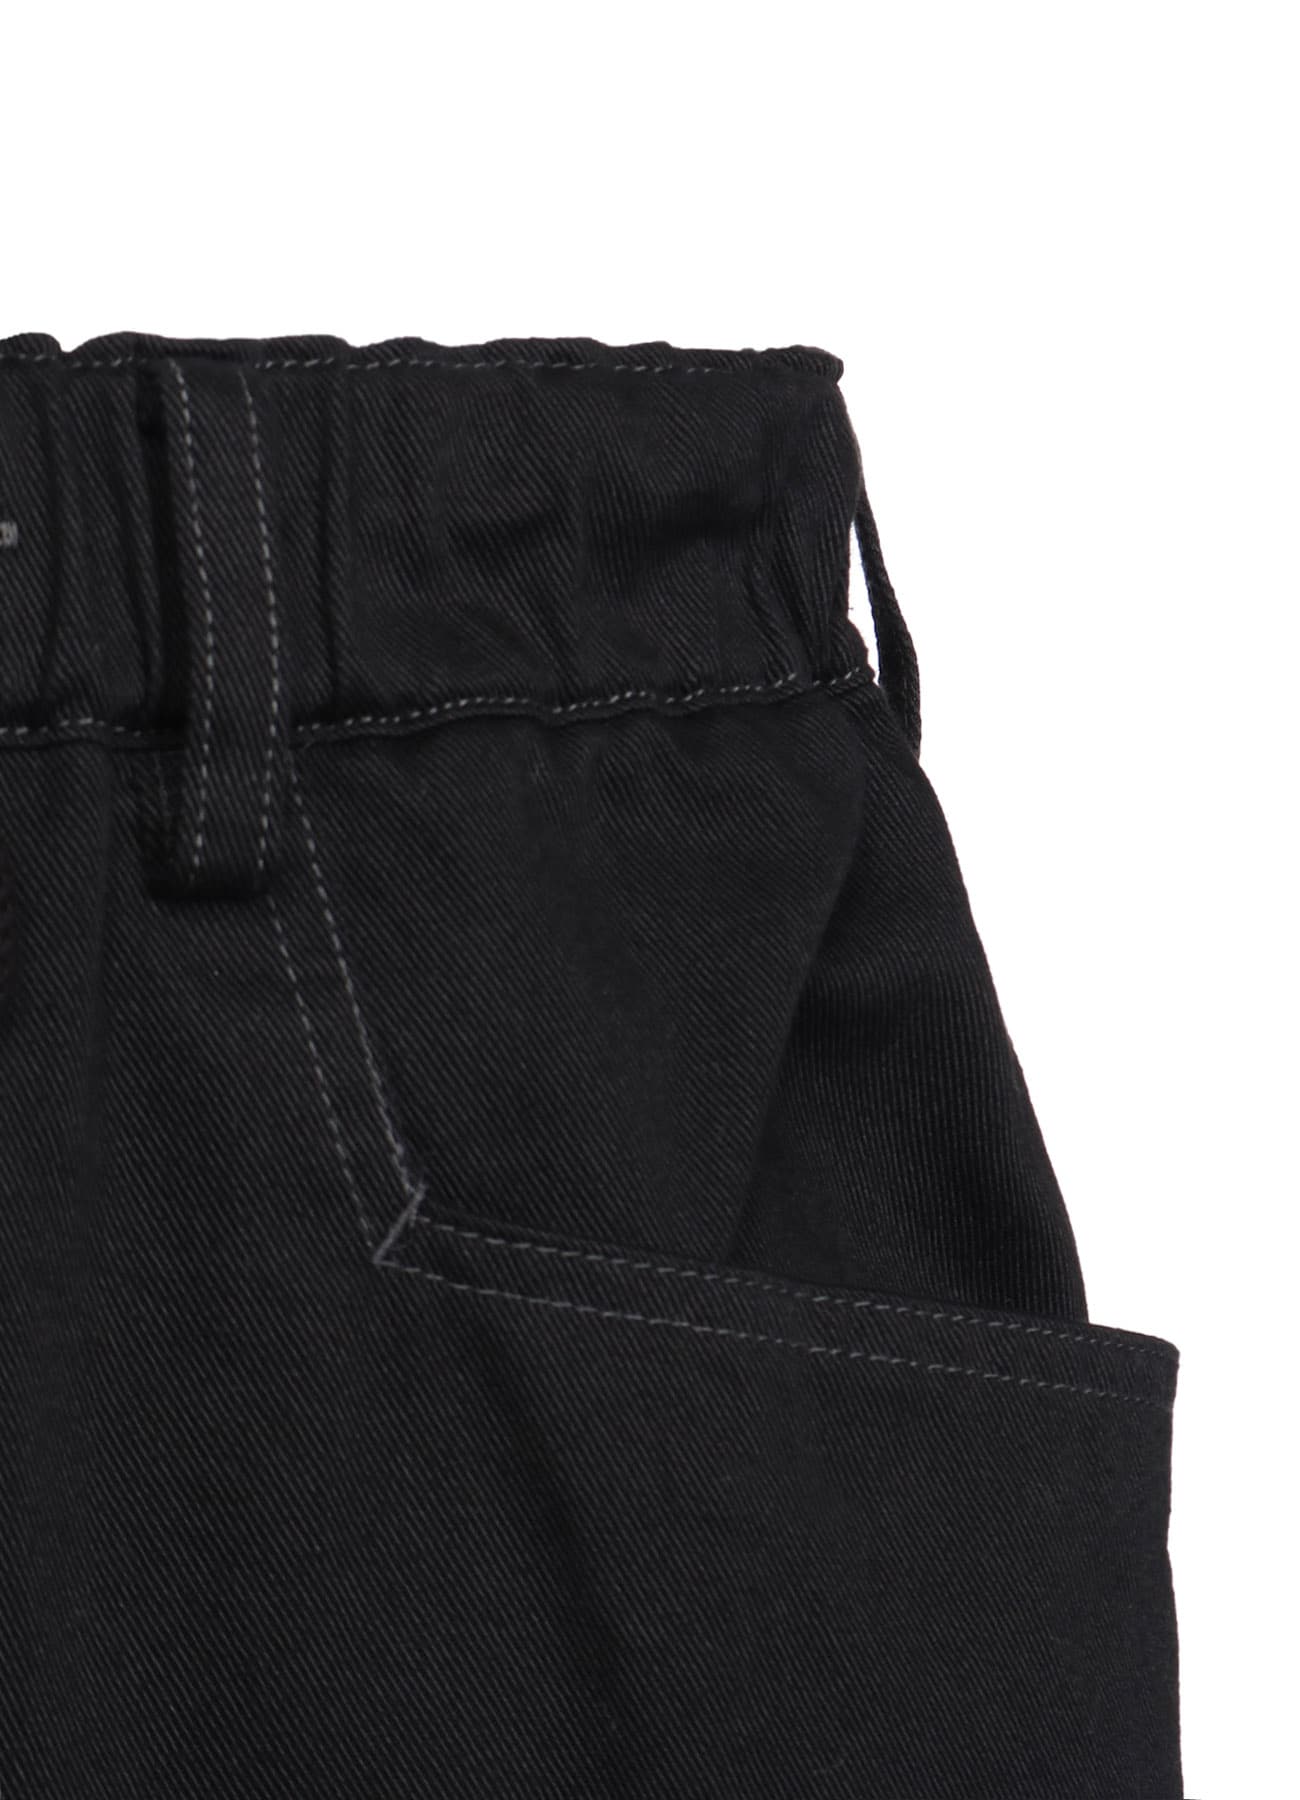 COTTON DRILL CARGO PANTS WITH BELTED HEMS